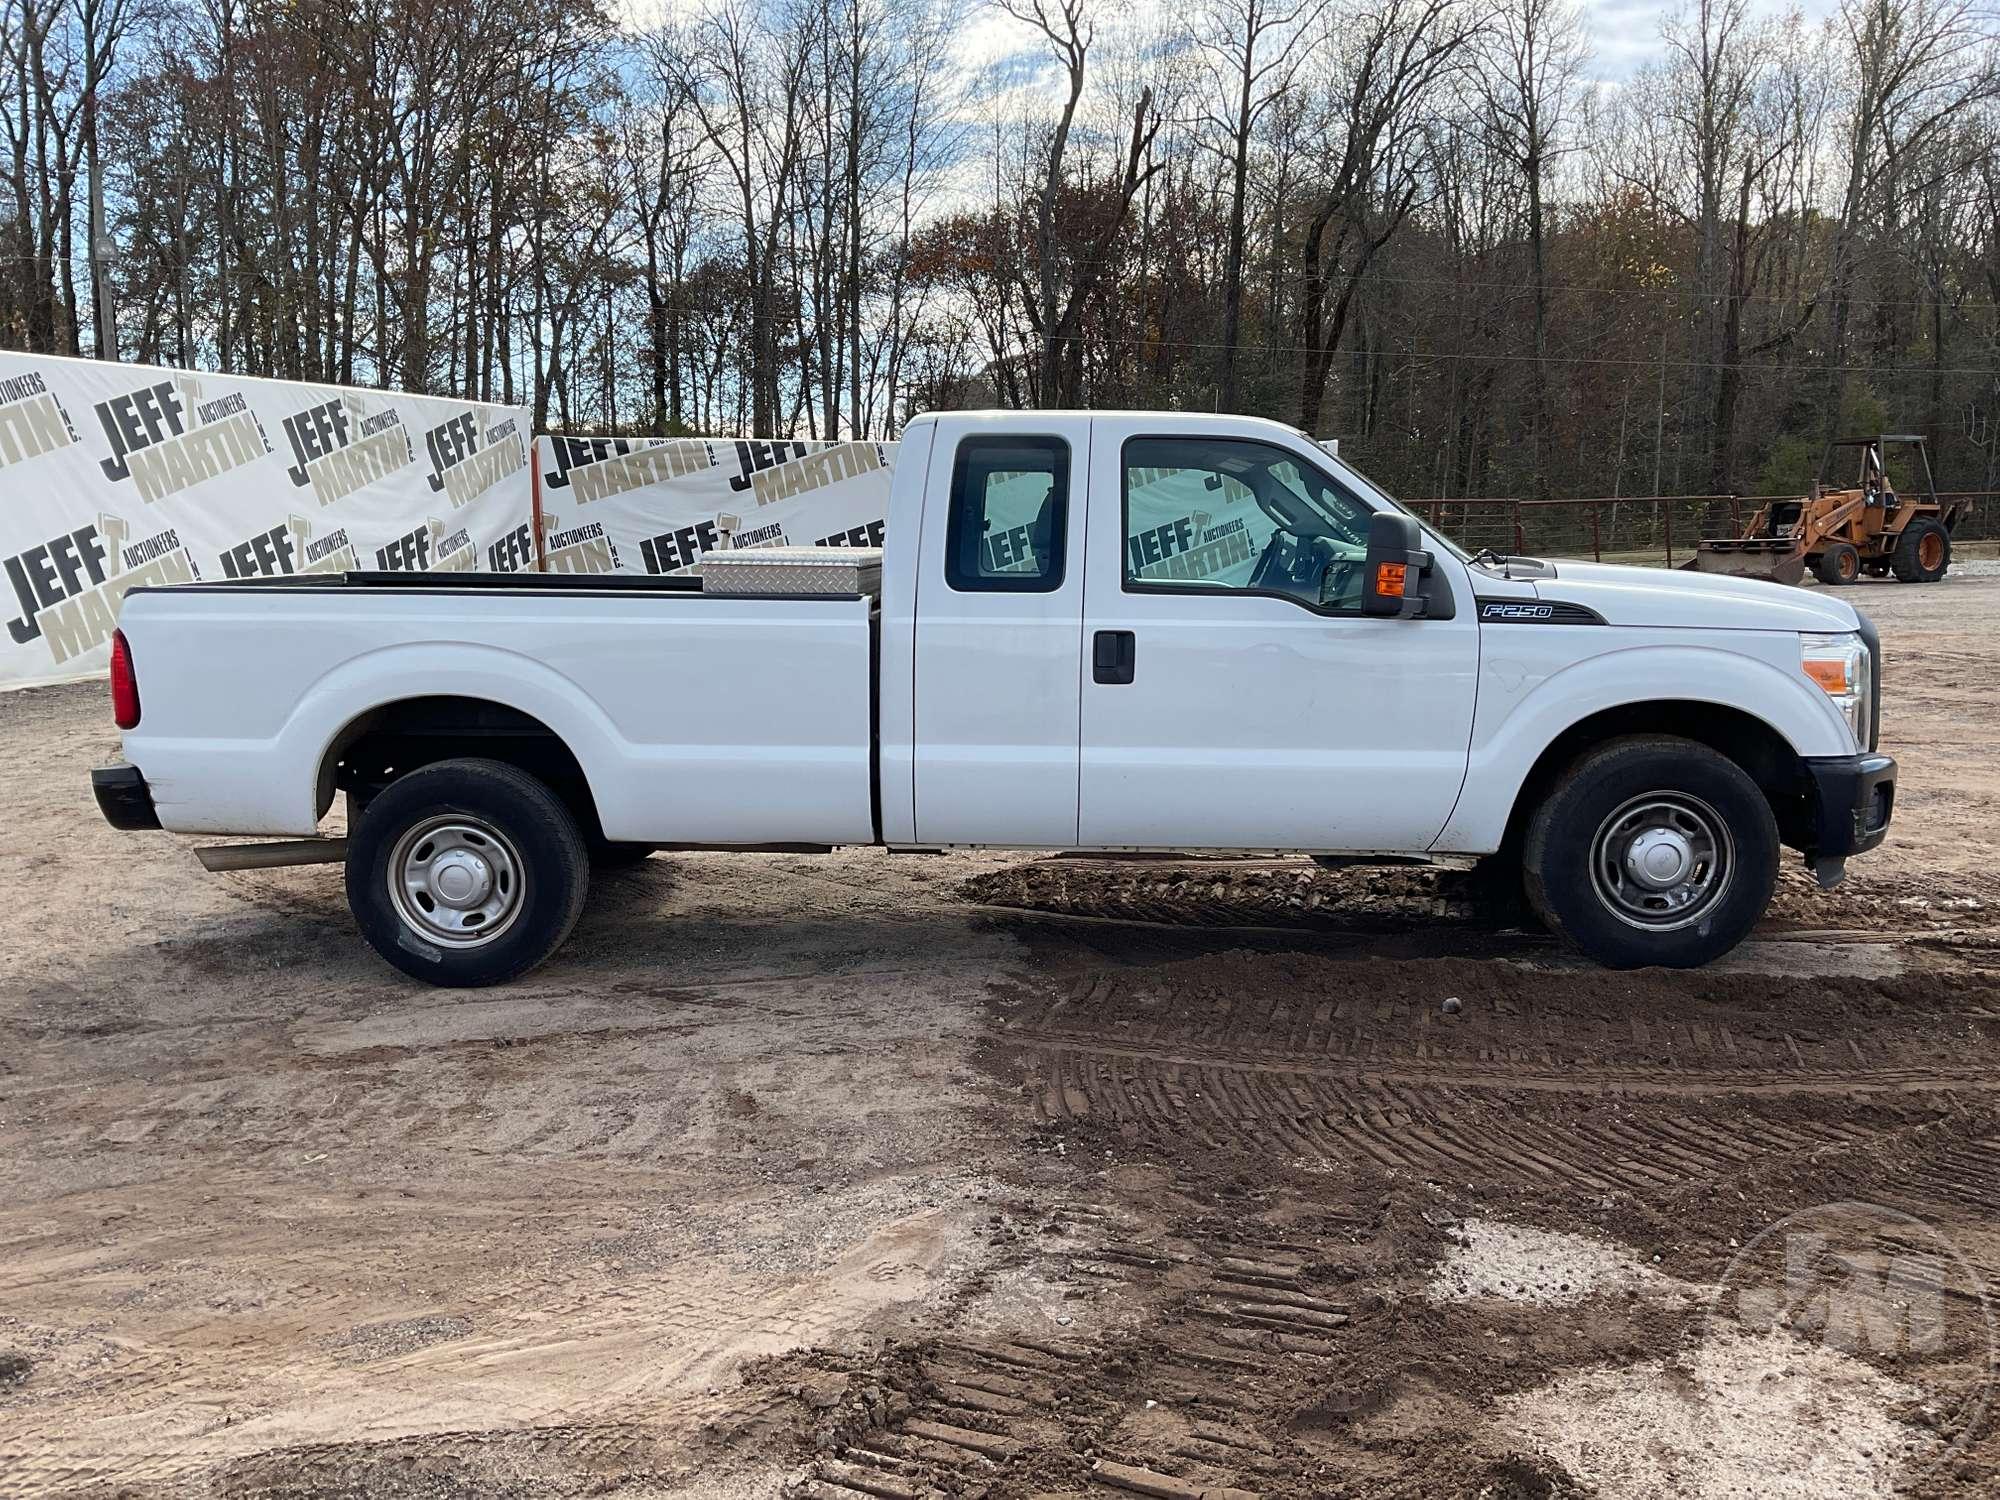 2012 FORD F-250 XL EXTENDED CAB 3/4 TON PICKUP VIN: 1FT7X2A64CEB55053